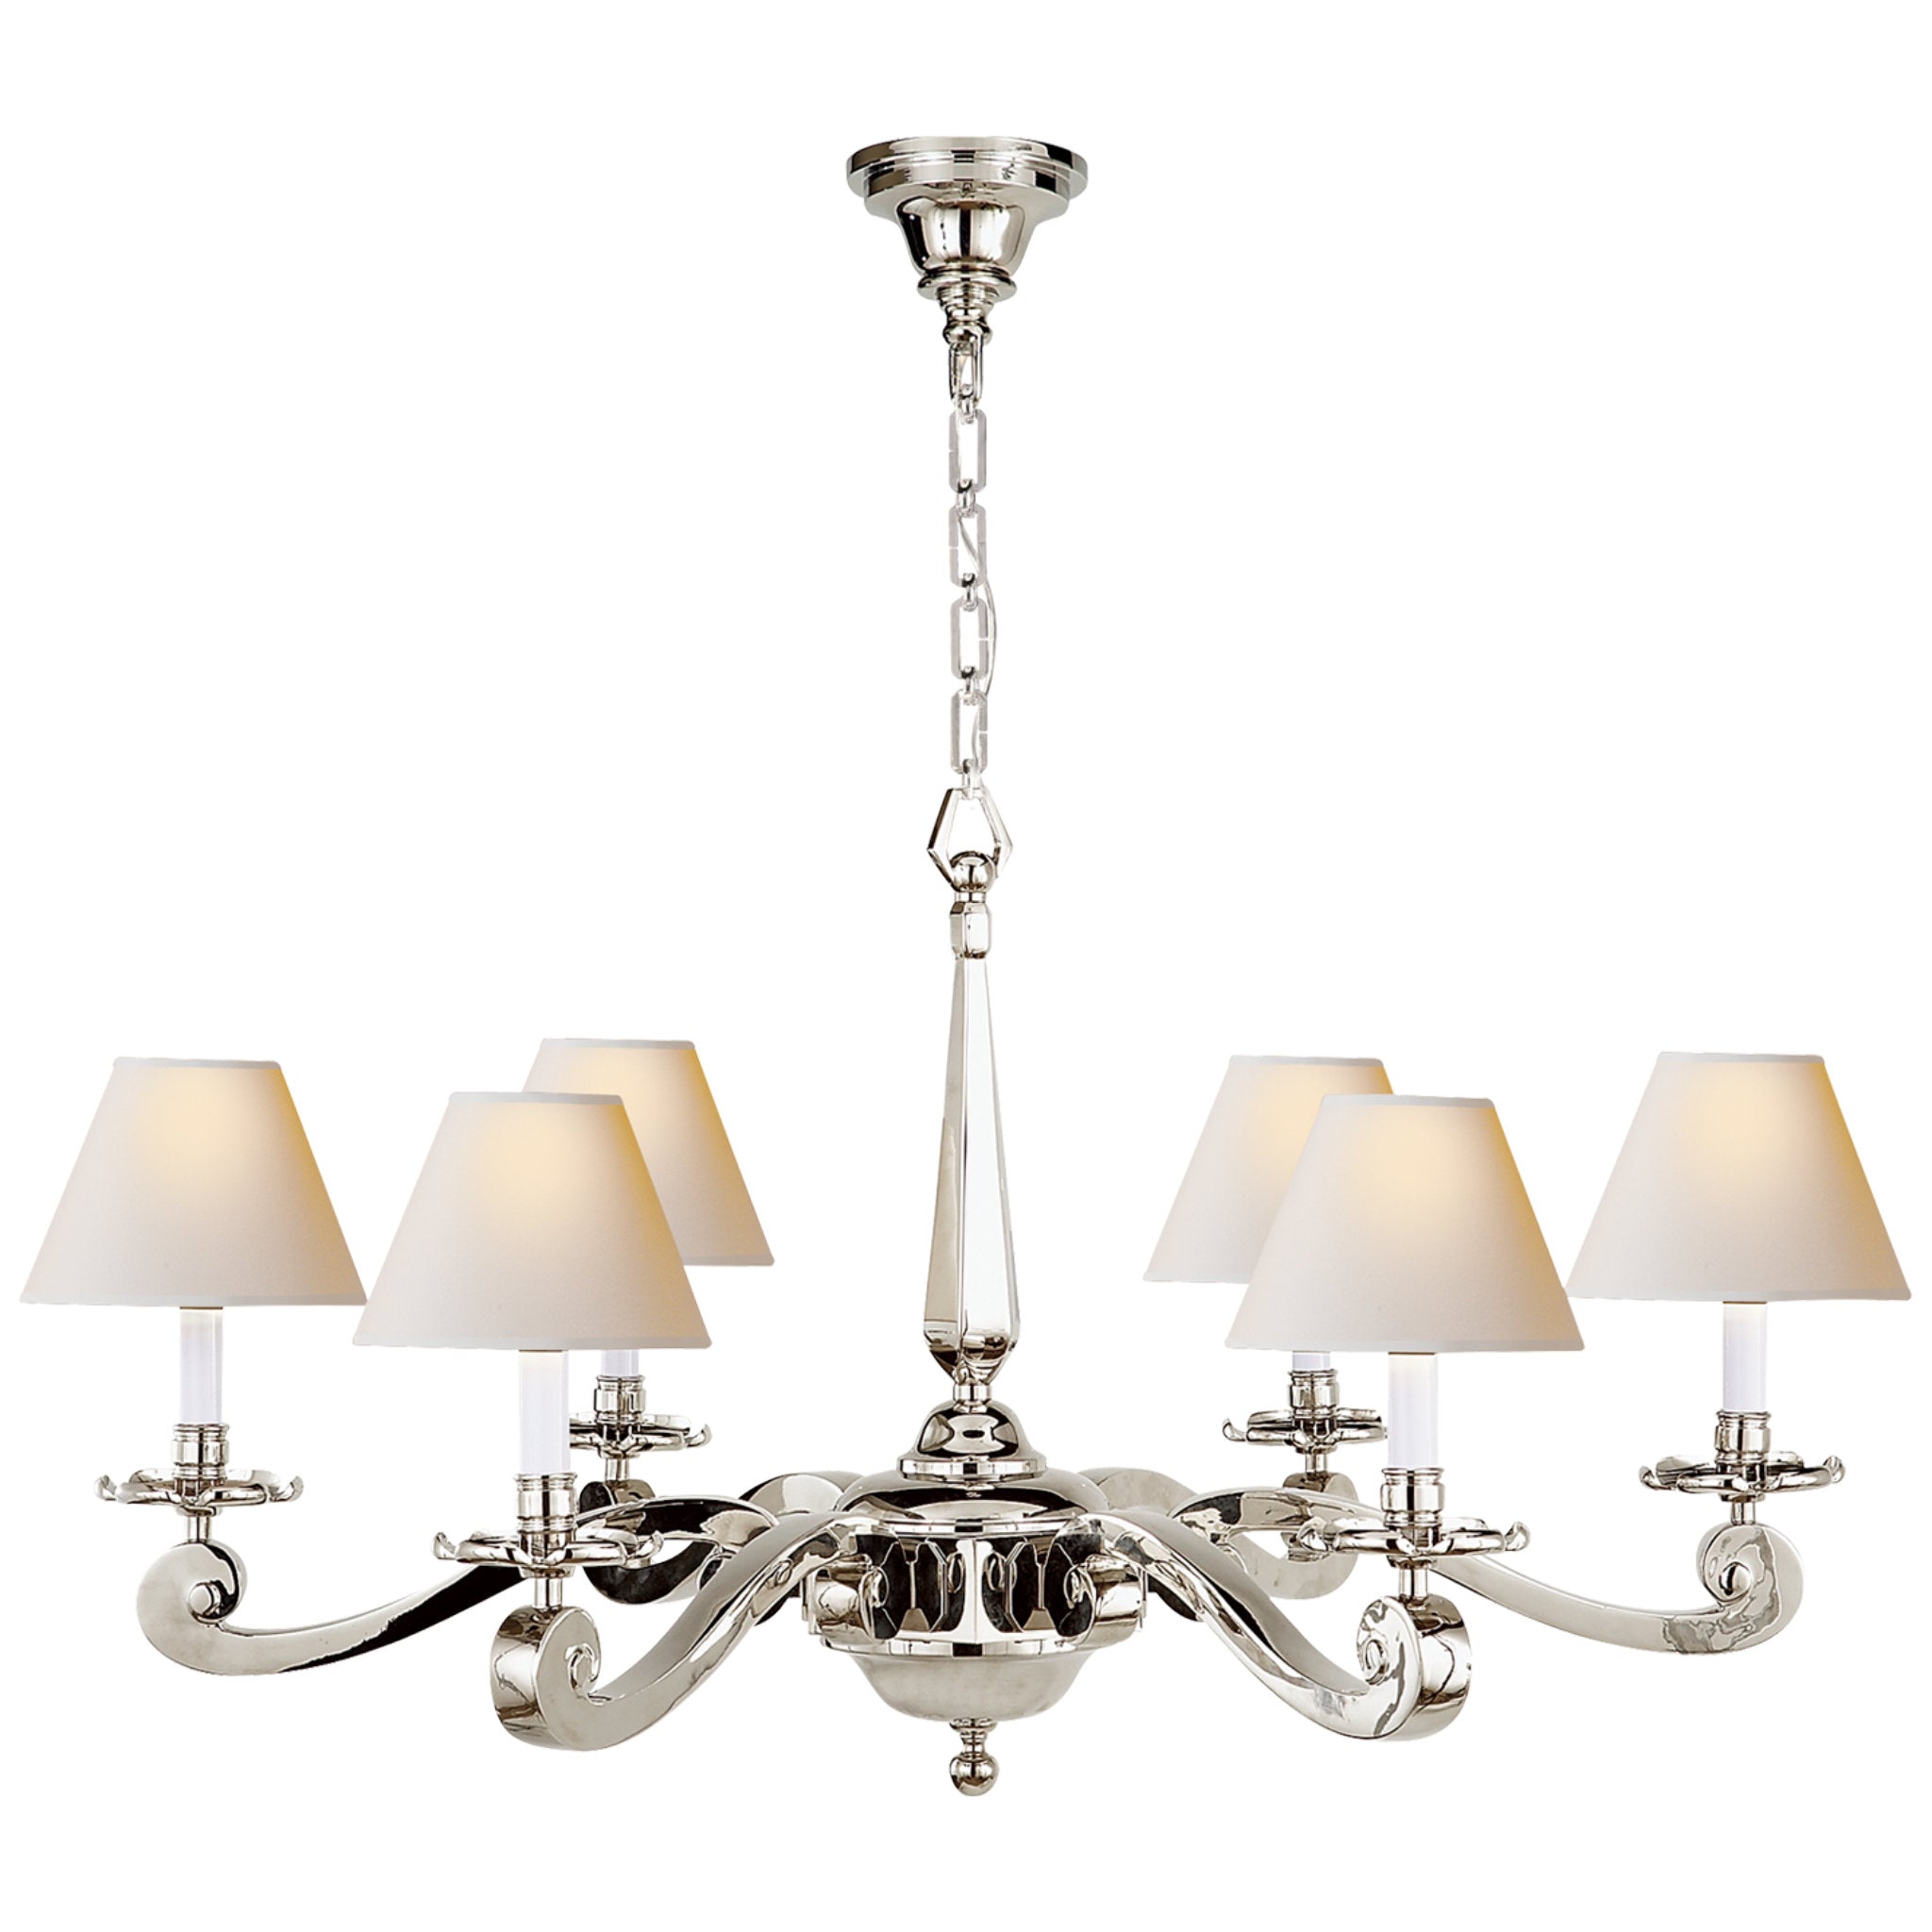 Alexa Hampton Myrna Chandelier in Polished Nickel with Natural Paper Shades